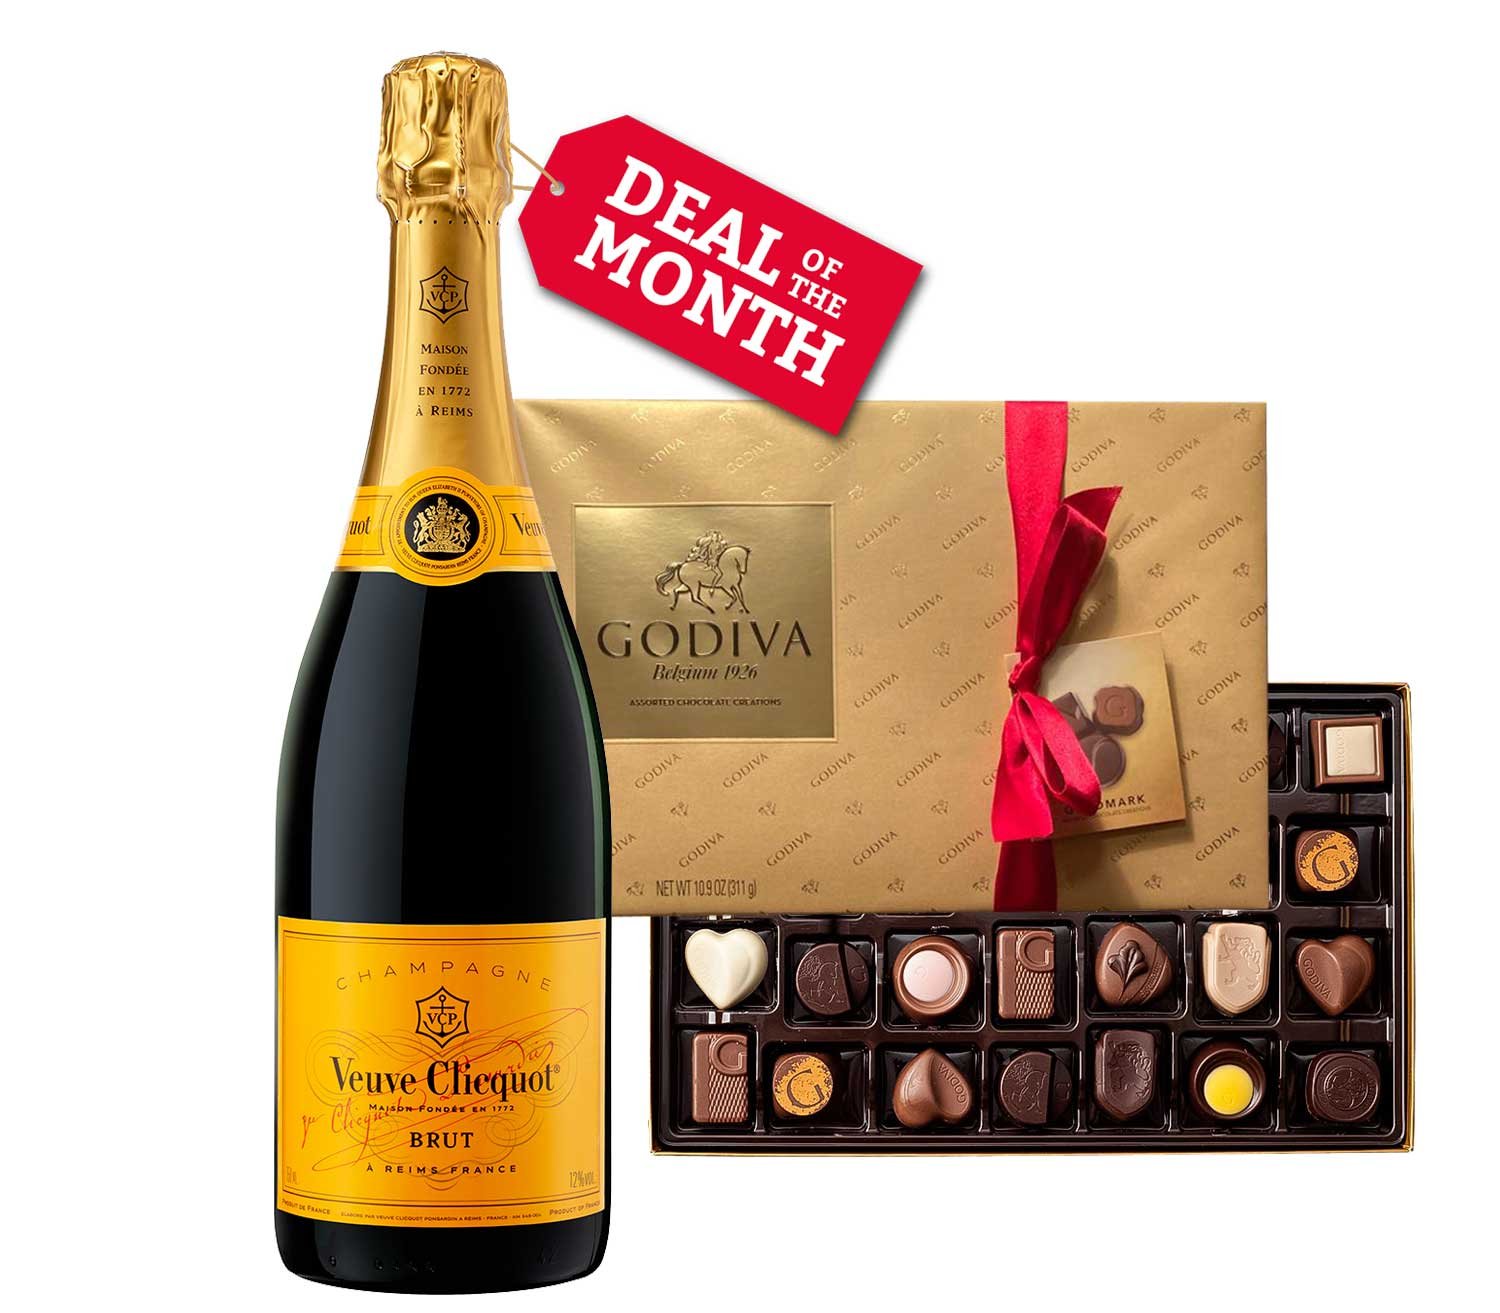 https://www.dcwineandspirits.com/image/cache/catalog/Gift/godiva-26pc/veuve-clicquot-with-godiva-3-deal-of-the-month-1500x1313.jpg